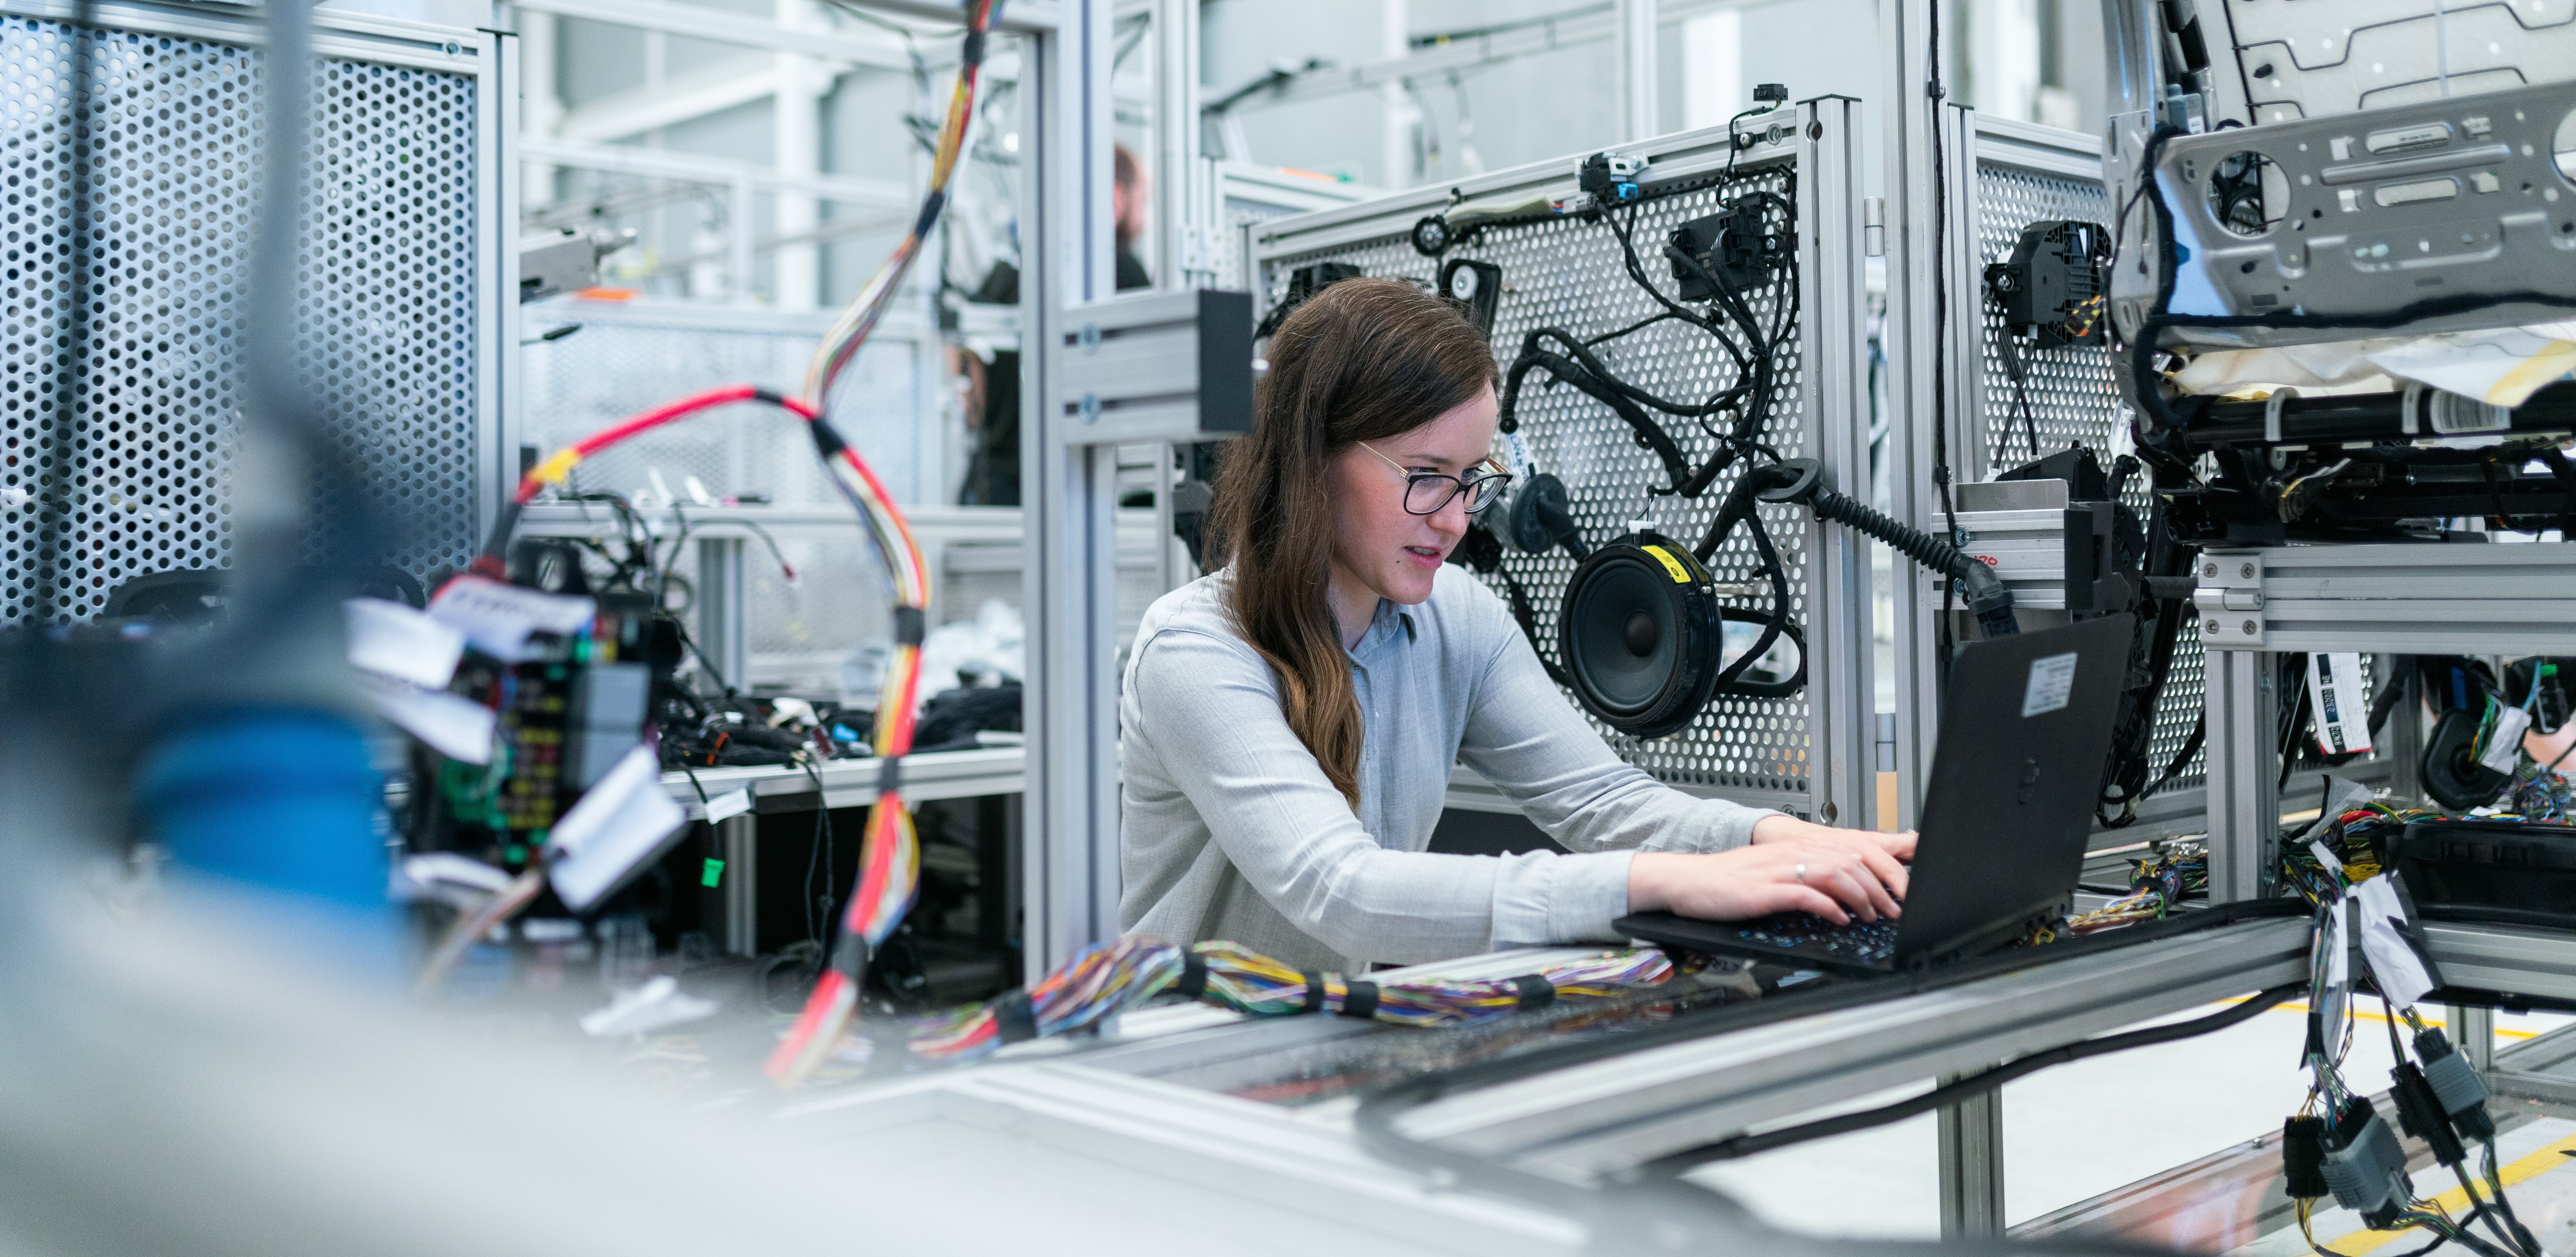 woman working on a laptop in an engineering manufacturing environment